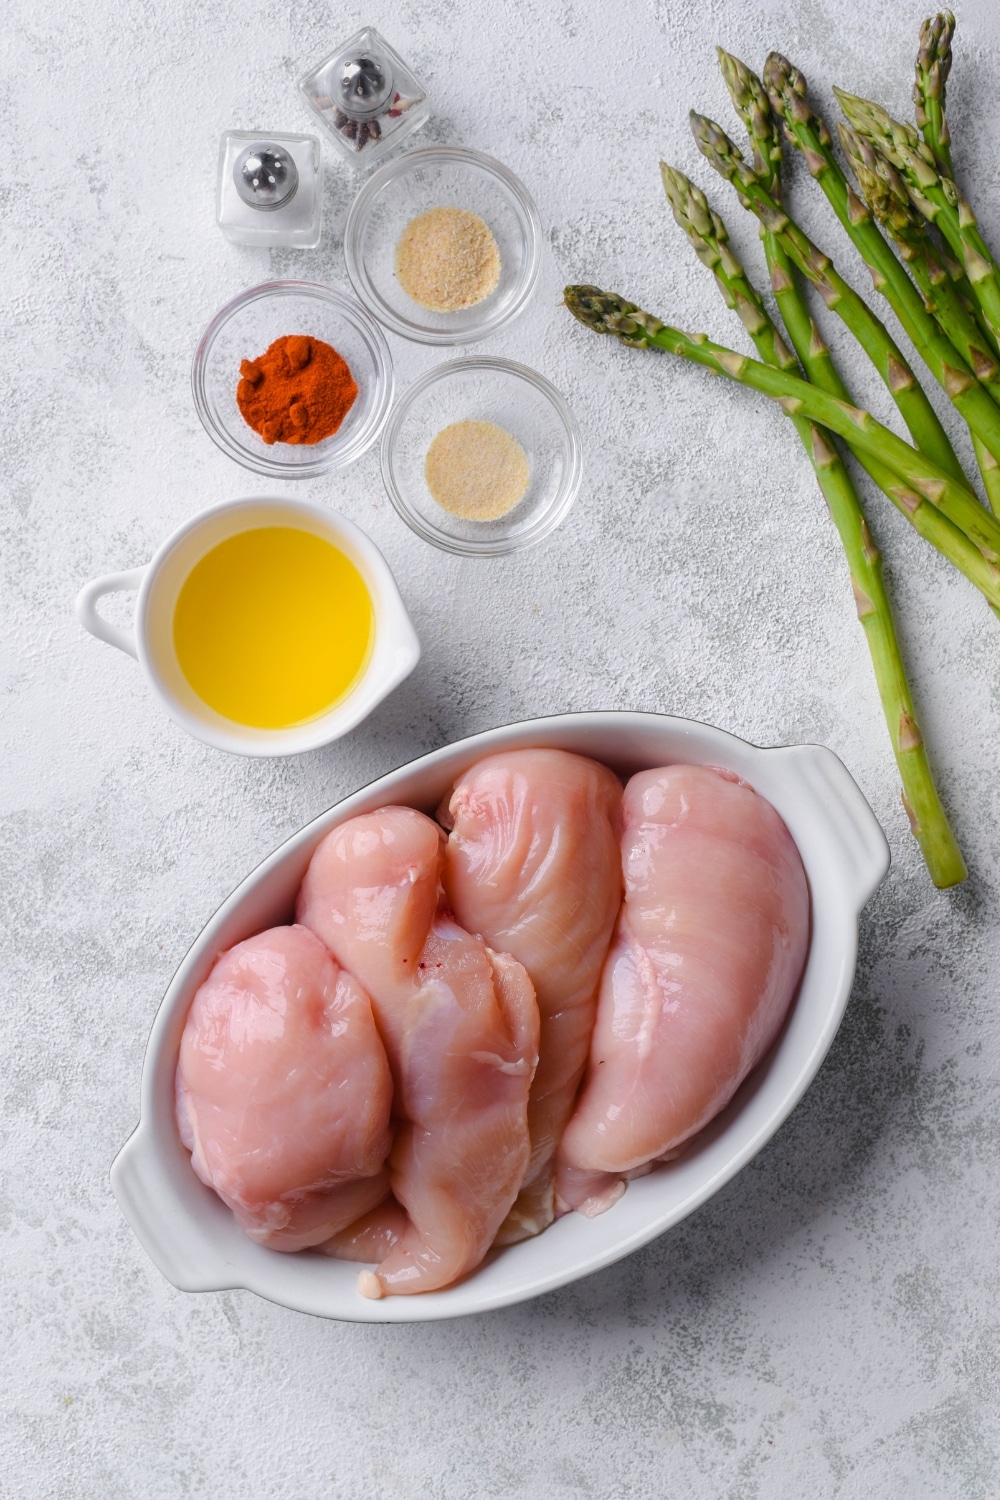 A tray of four raw chicken breasts, a small pitcher of melted butter, glass bowls of seasonings, salt and pepper shakers, and a bunch of asparagus.